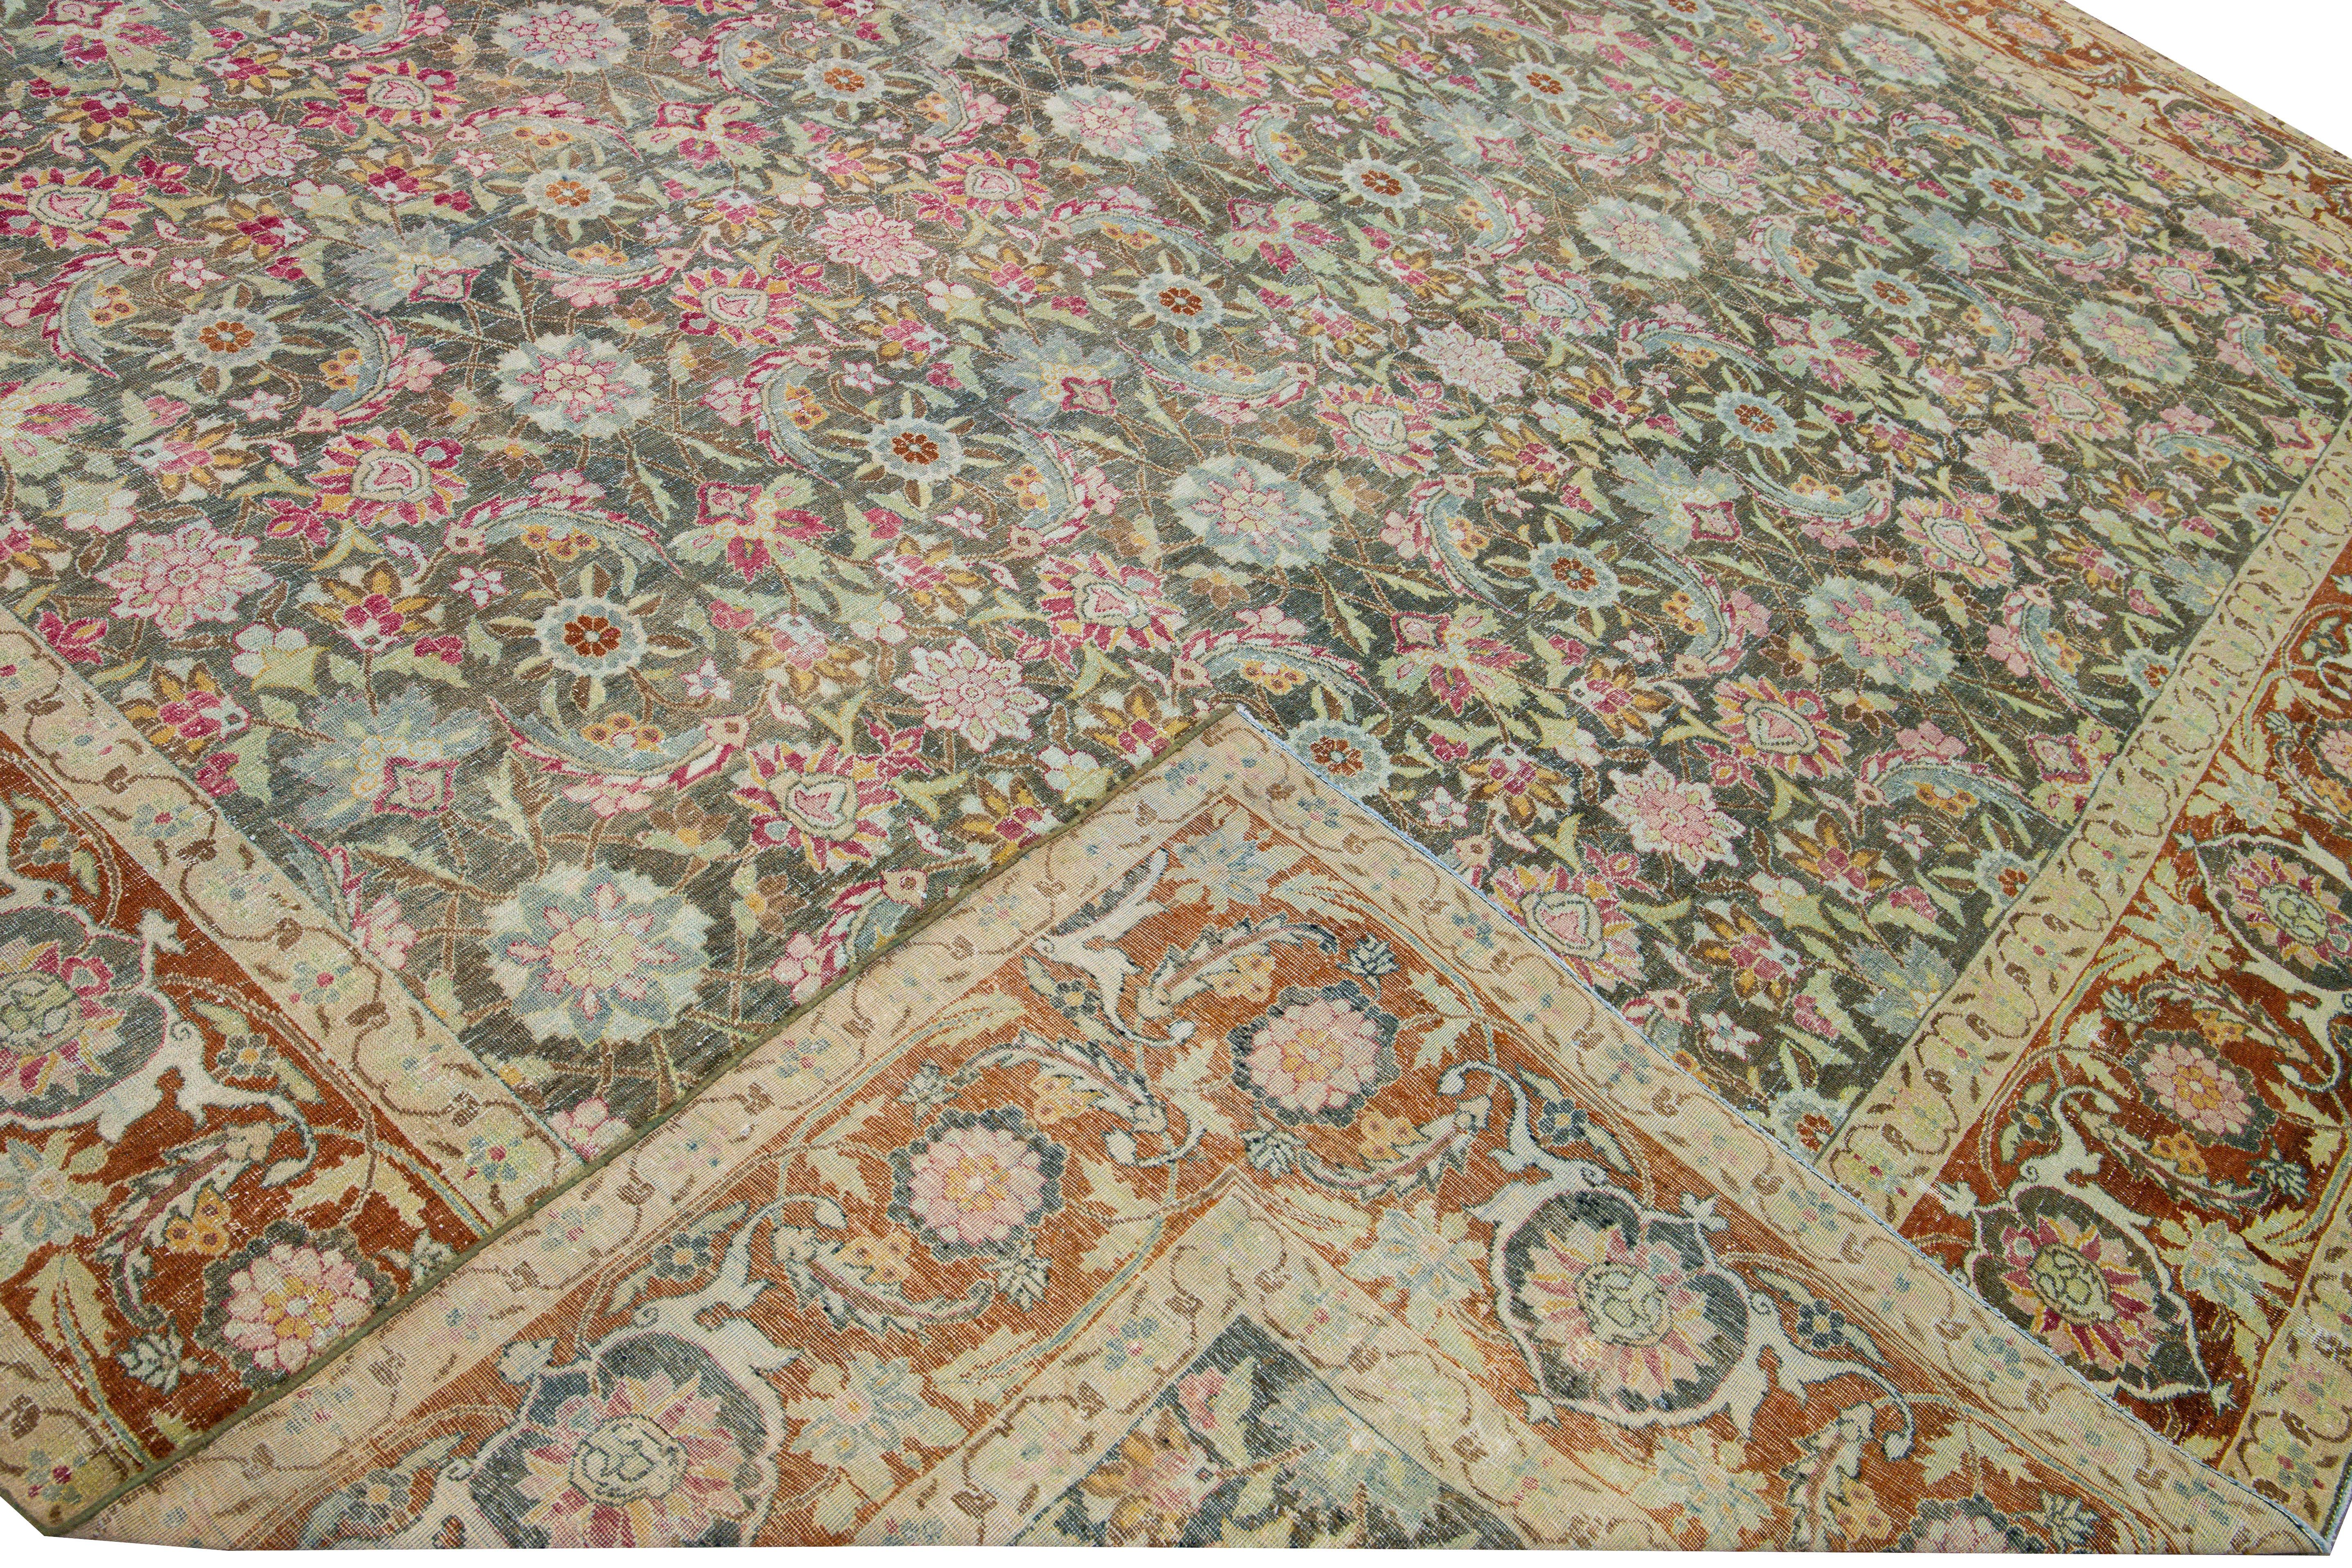 Beautiful antique Tabriz hand-knotted wool rug with a gray field. This Persian piece has a rusted frame and multicolor accents that feature an all-over botanical pattern design.

This rug measures: 11'2